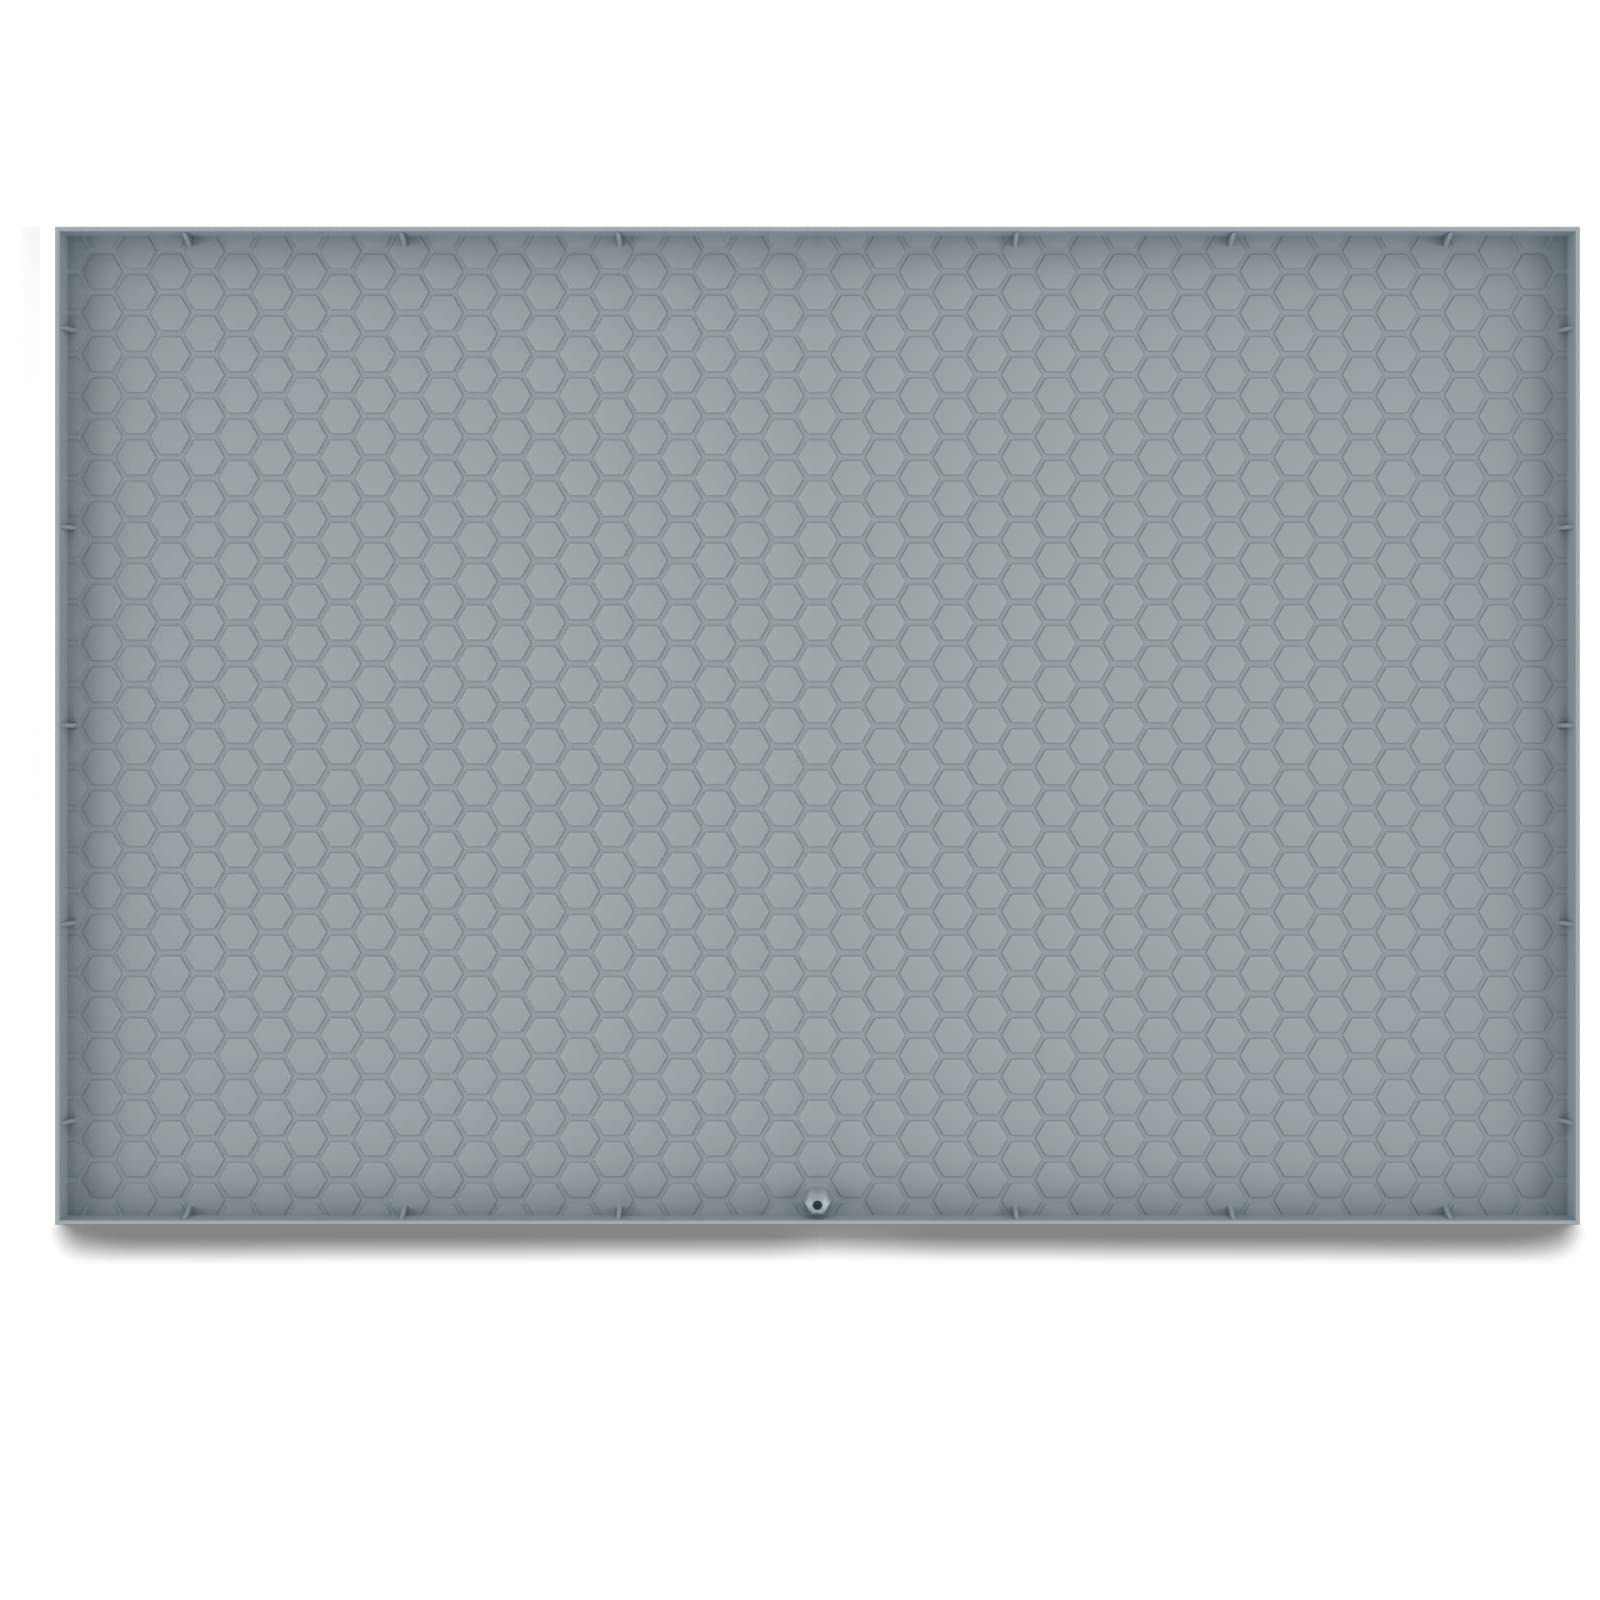 Under Sink Mat Waterproof, Under Sink Liner with Drain Hole, Kitchen Bathroom Silicone Cabinet Liner Hold up to 3.3 Gallons Liquid (Grey), Gray, 34 inches * 22 inches * 1 inches